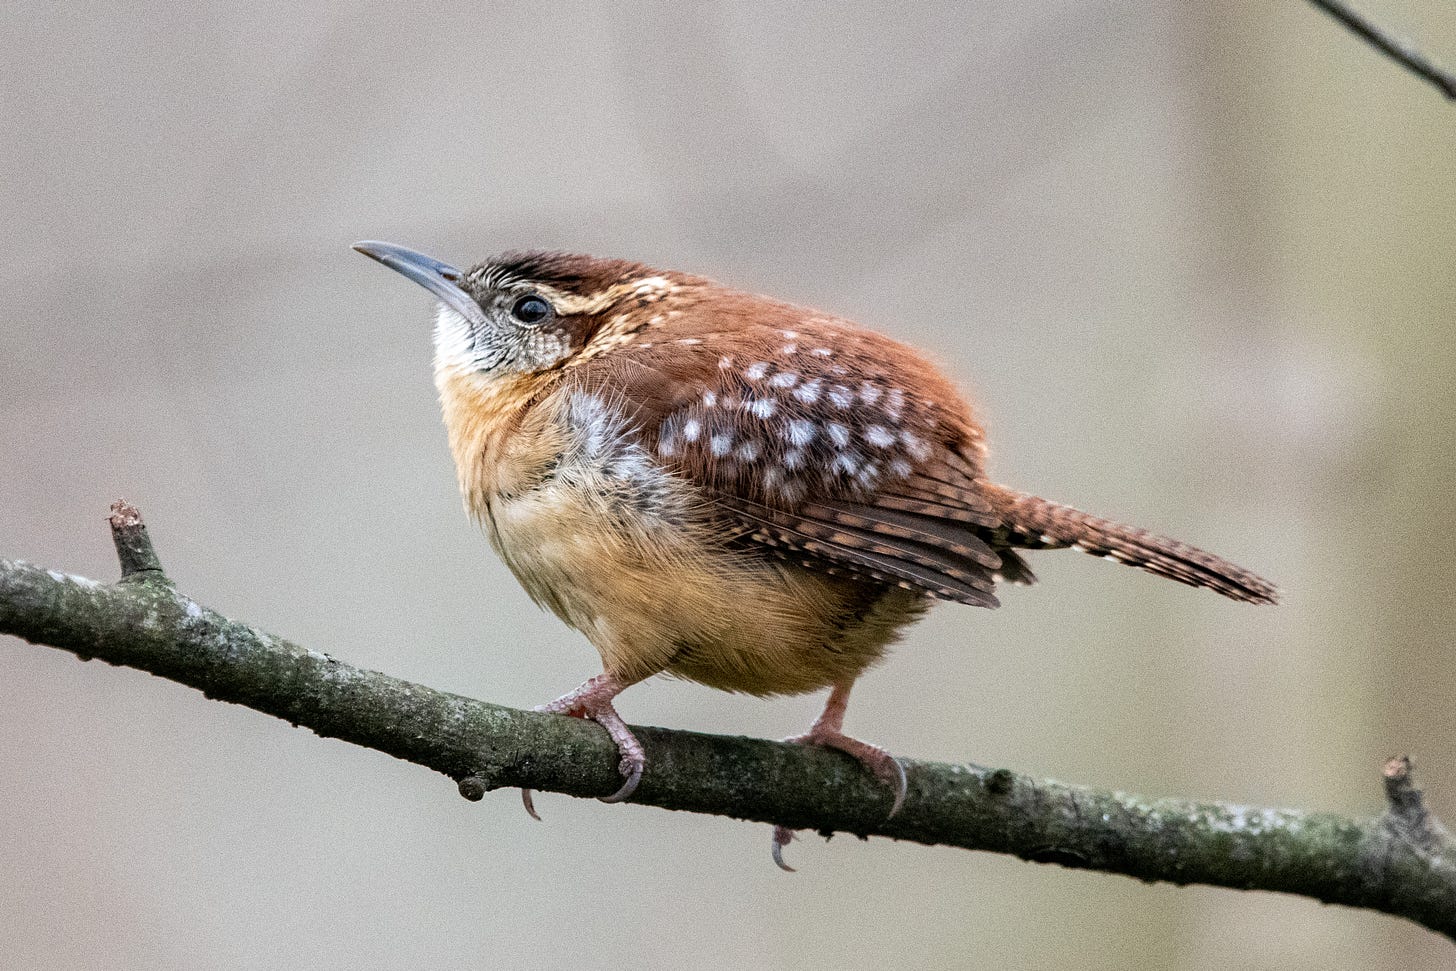 A Carolina wren in profile, its fawn-like spots salient, its shoulders hunched as it looks up